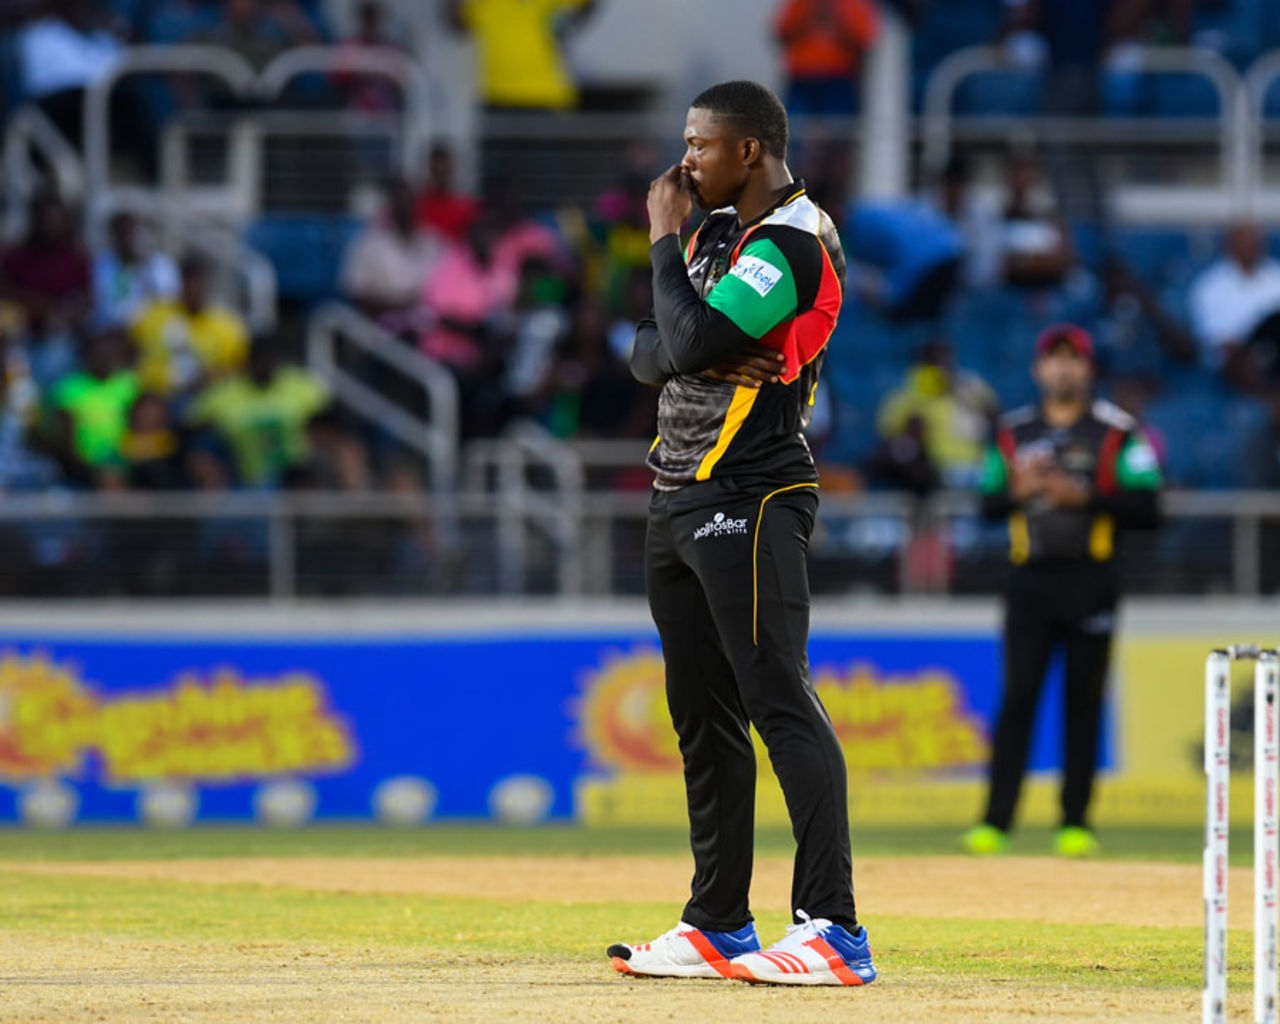 Sheldon Cottrell looks on in disappointment, Jamaica Tallawahs v St Kitts and Nevis Patriots, CPL 2017, Kingston, August 30, 2017